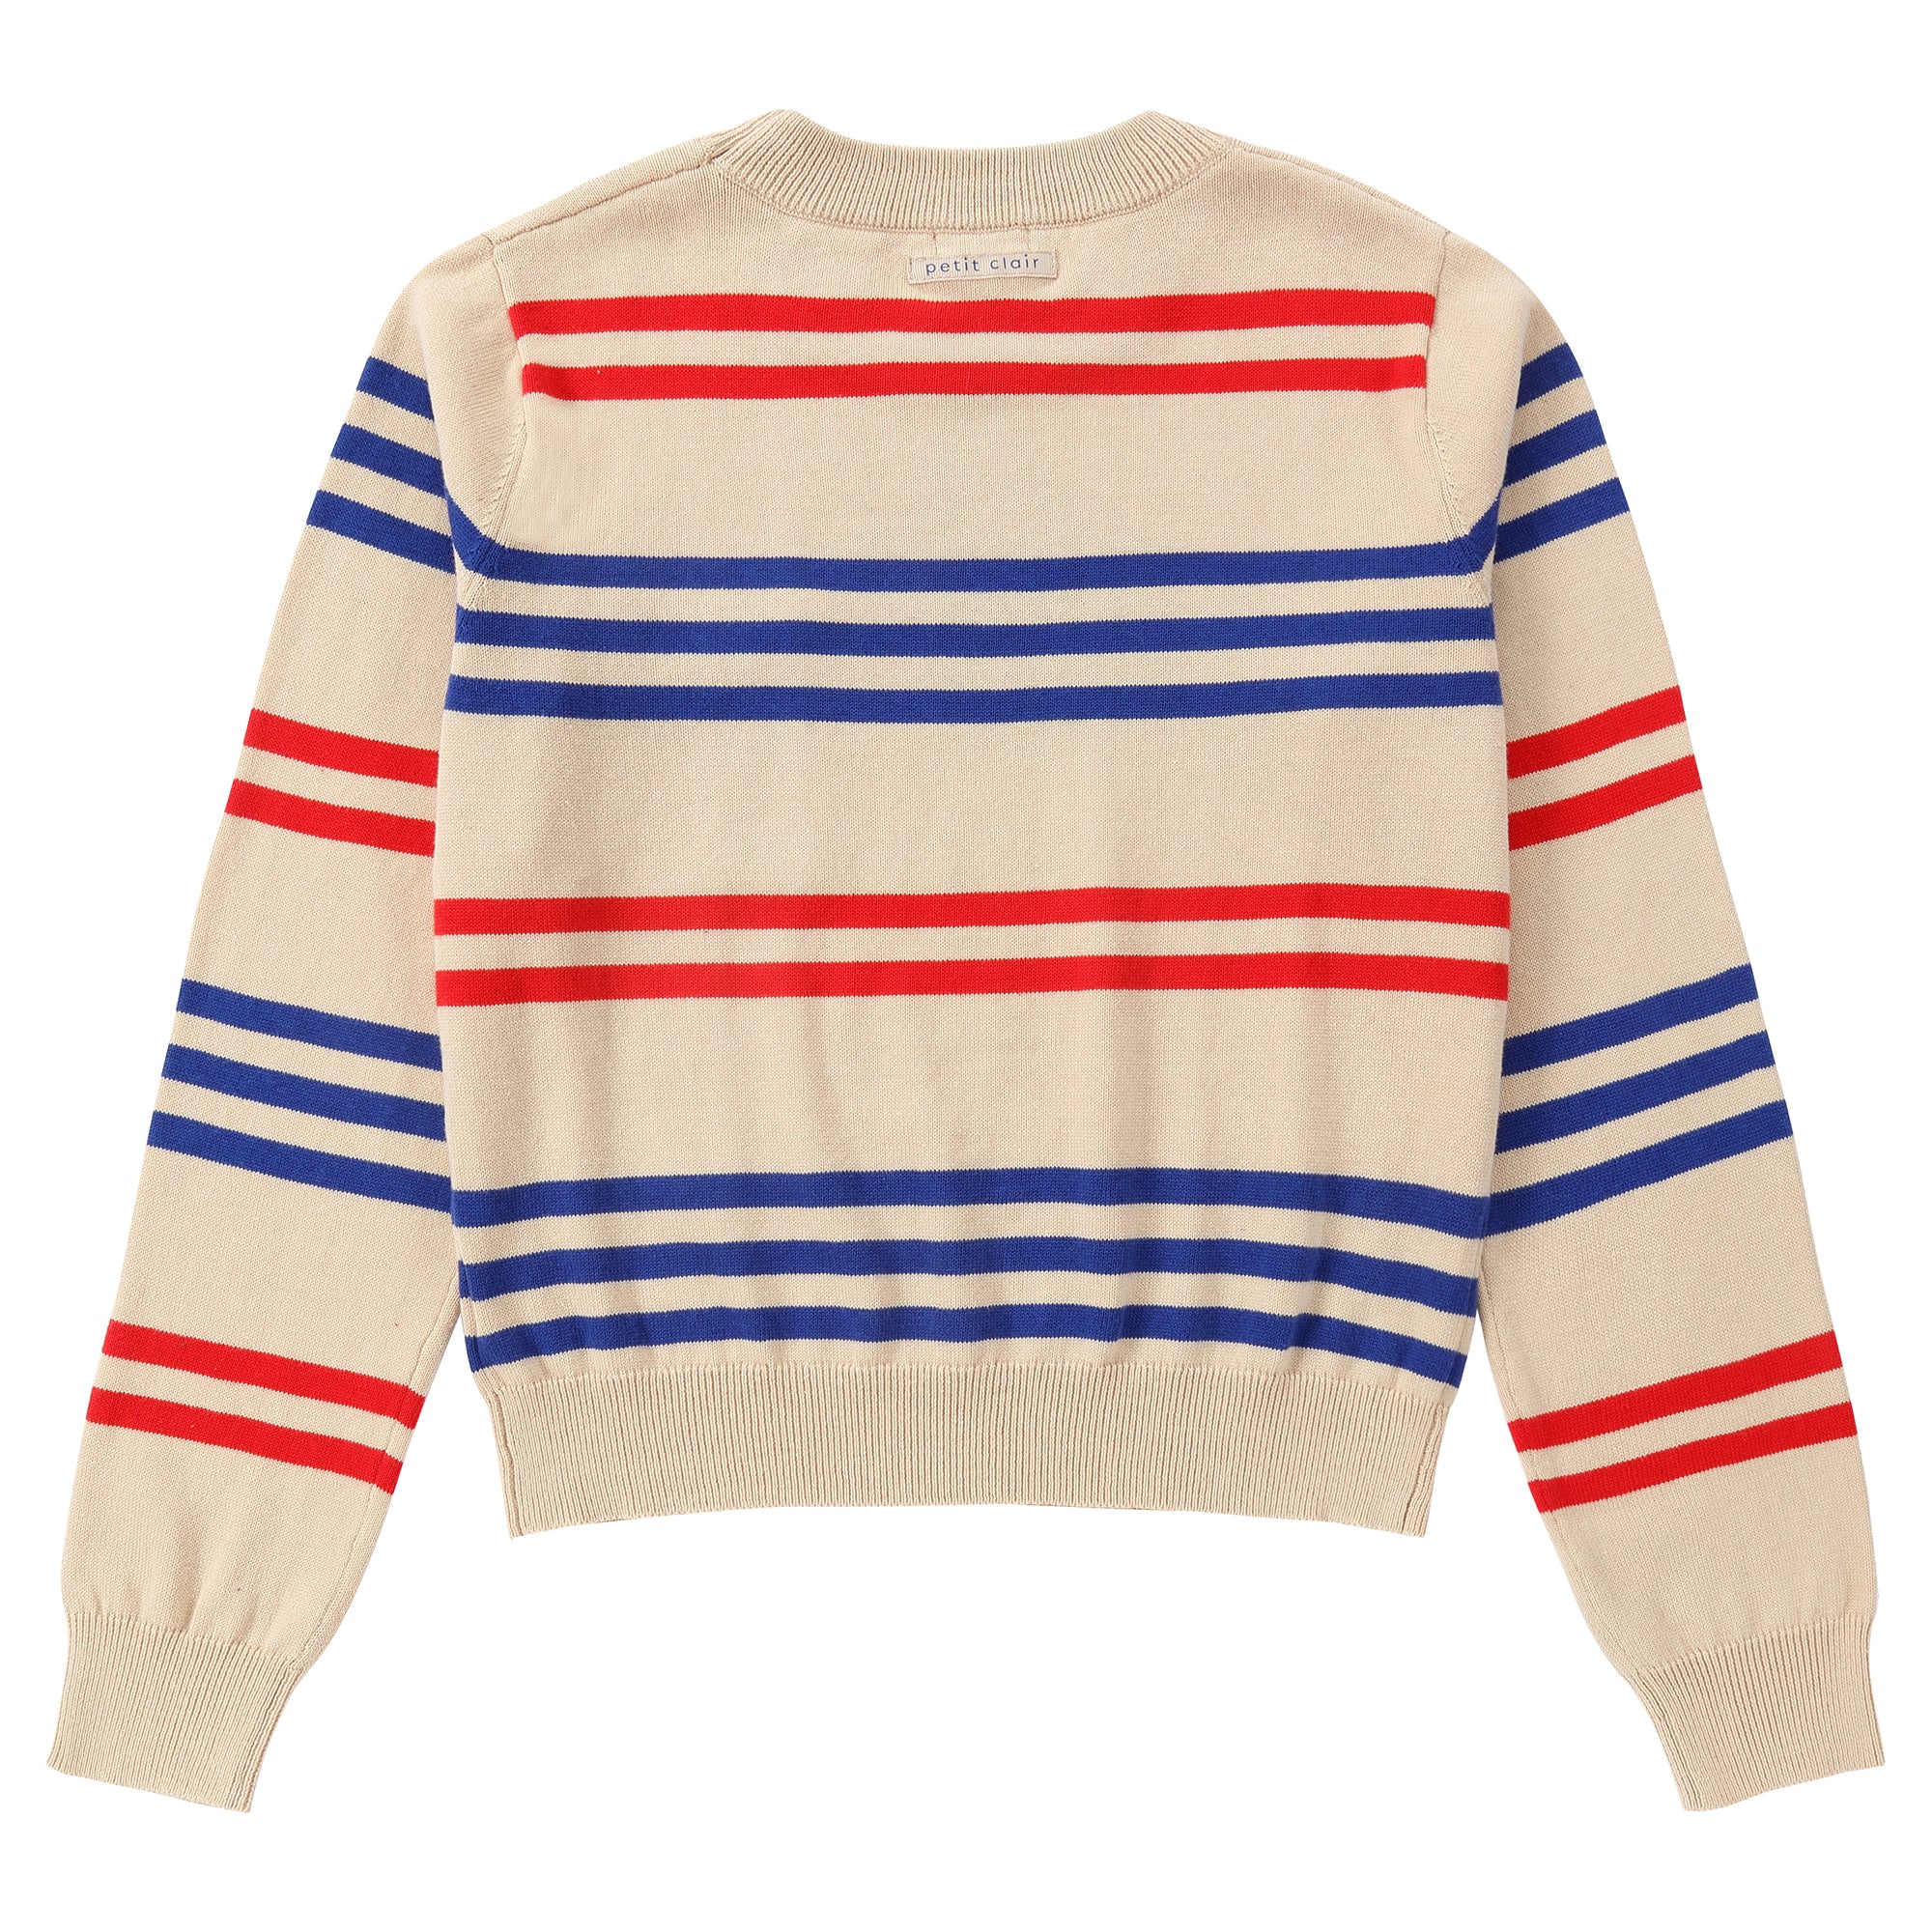 Tan Sweater With Royal Blue and Red Stripes